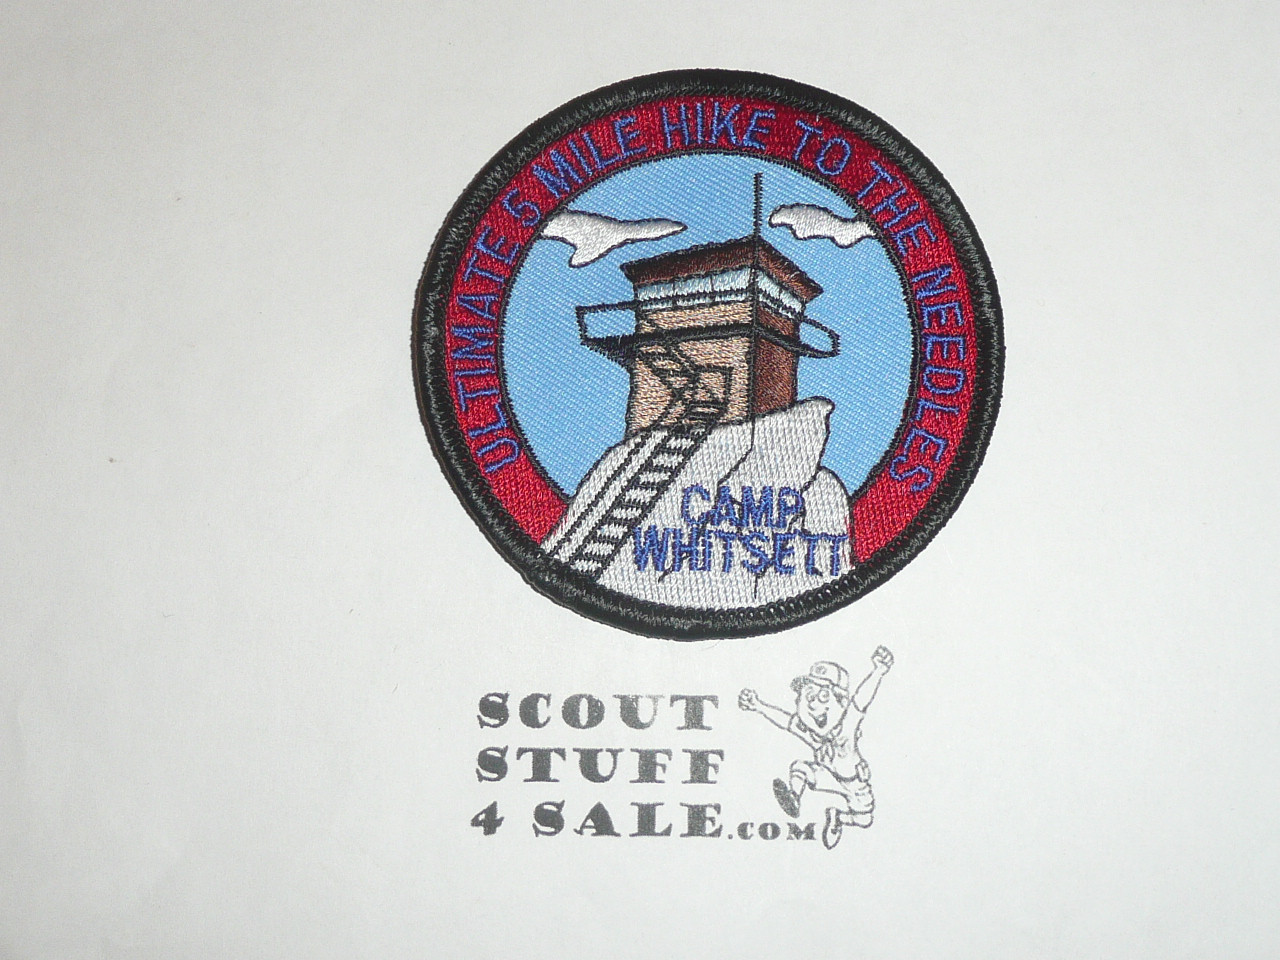 1990's Camp Whitsett Needles Hike Patch - Scout